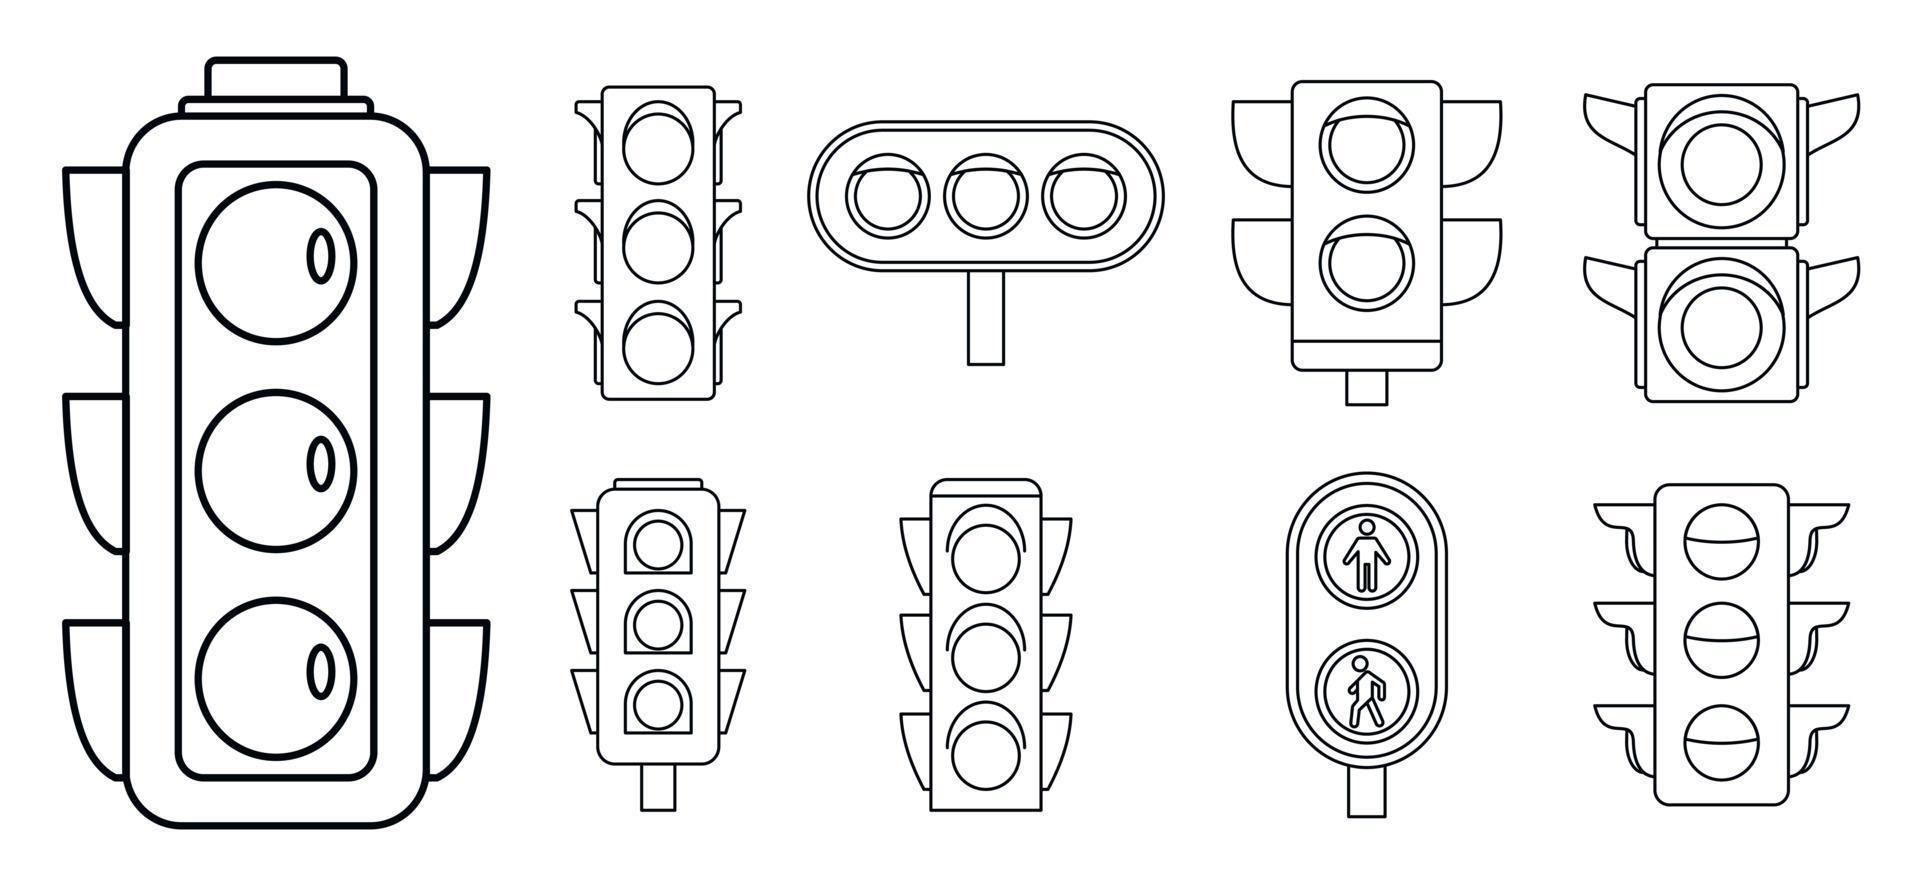 Road traffic lights icon set, outline style vector